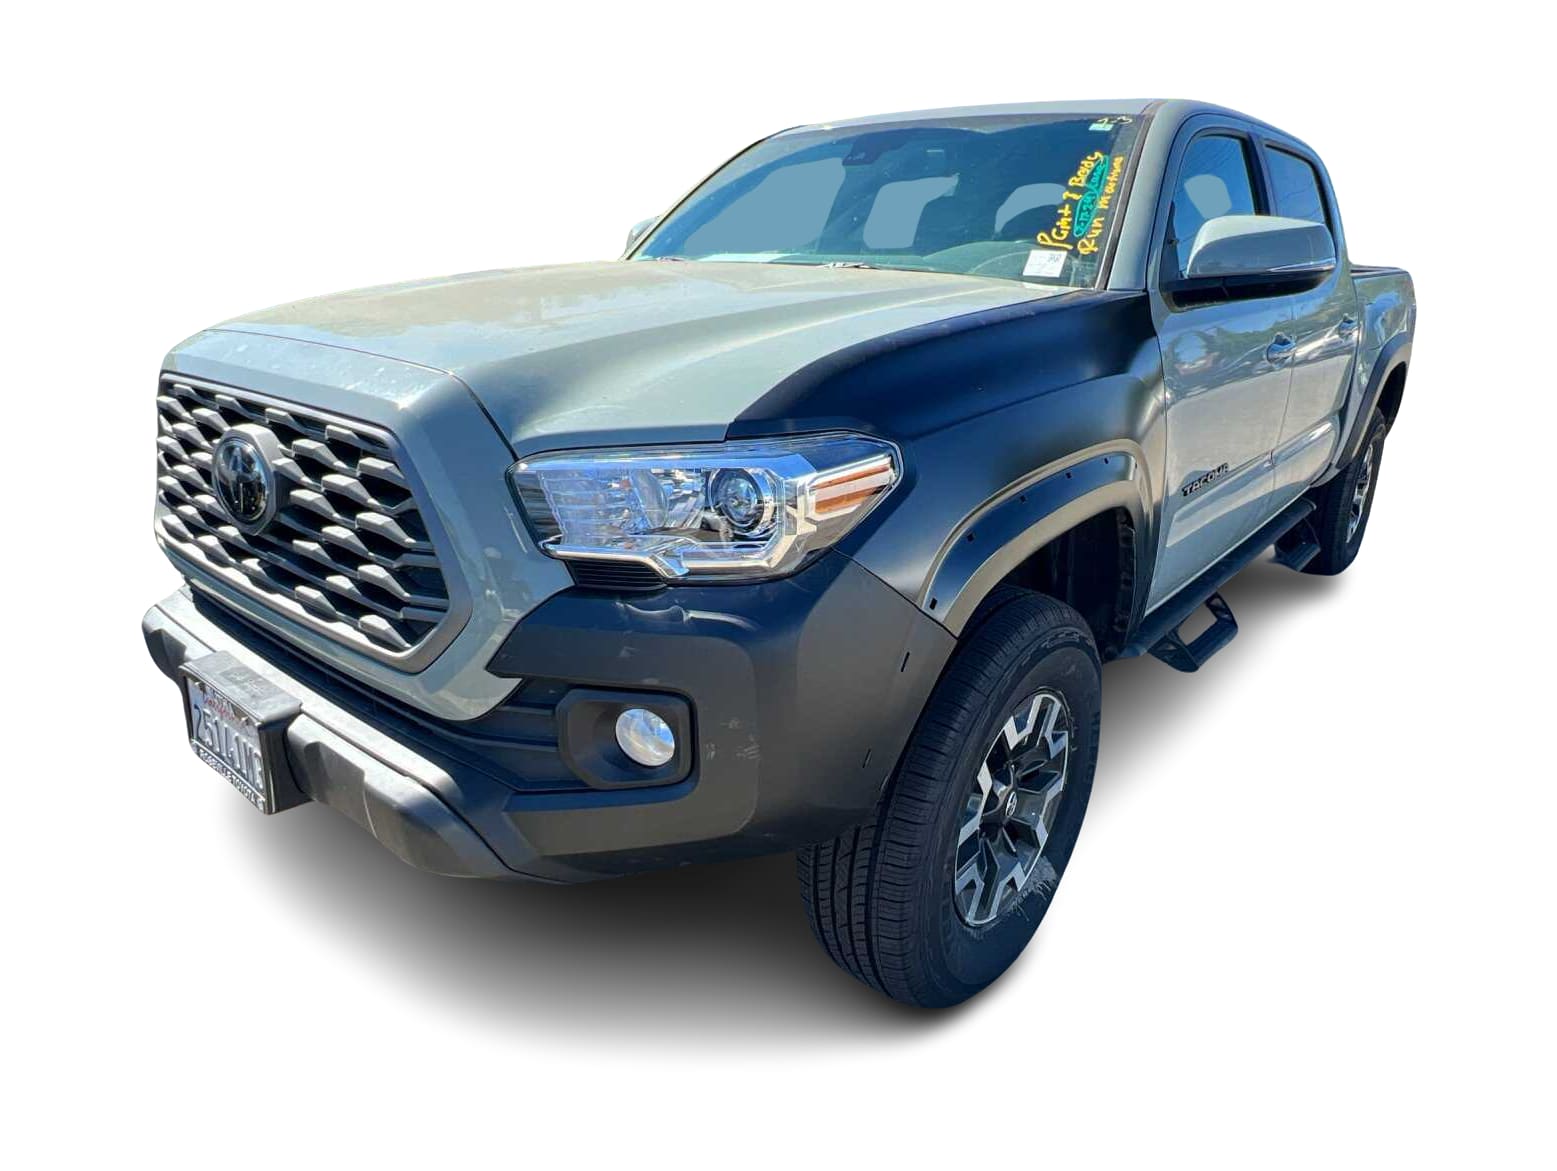 2022 Toyota Tacoma TRD Off-Road -
                Roseville, CA